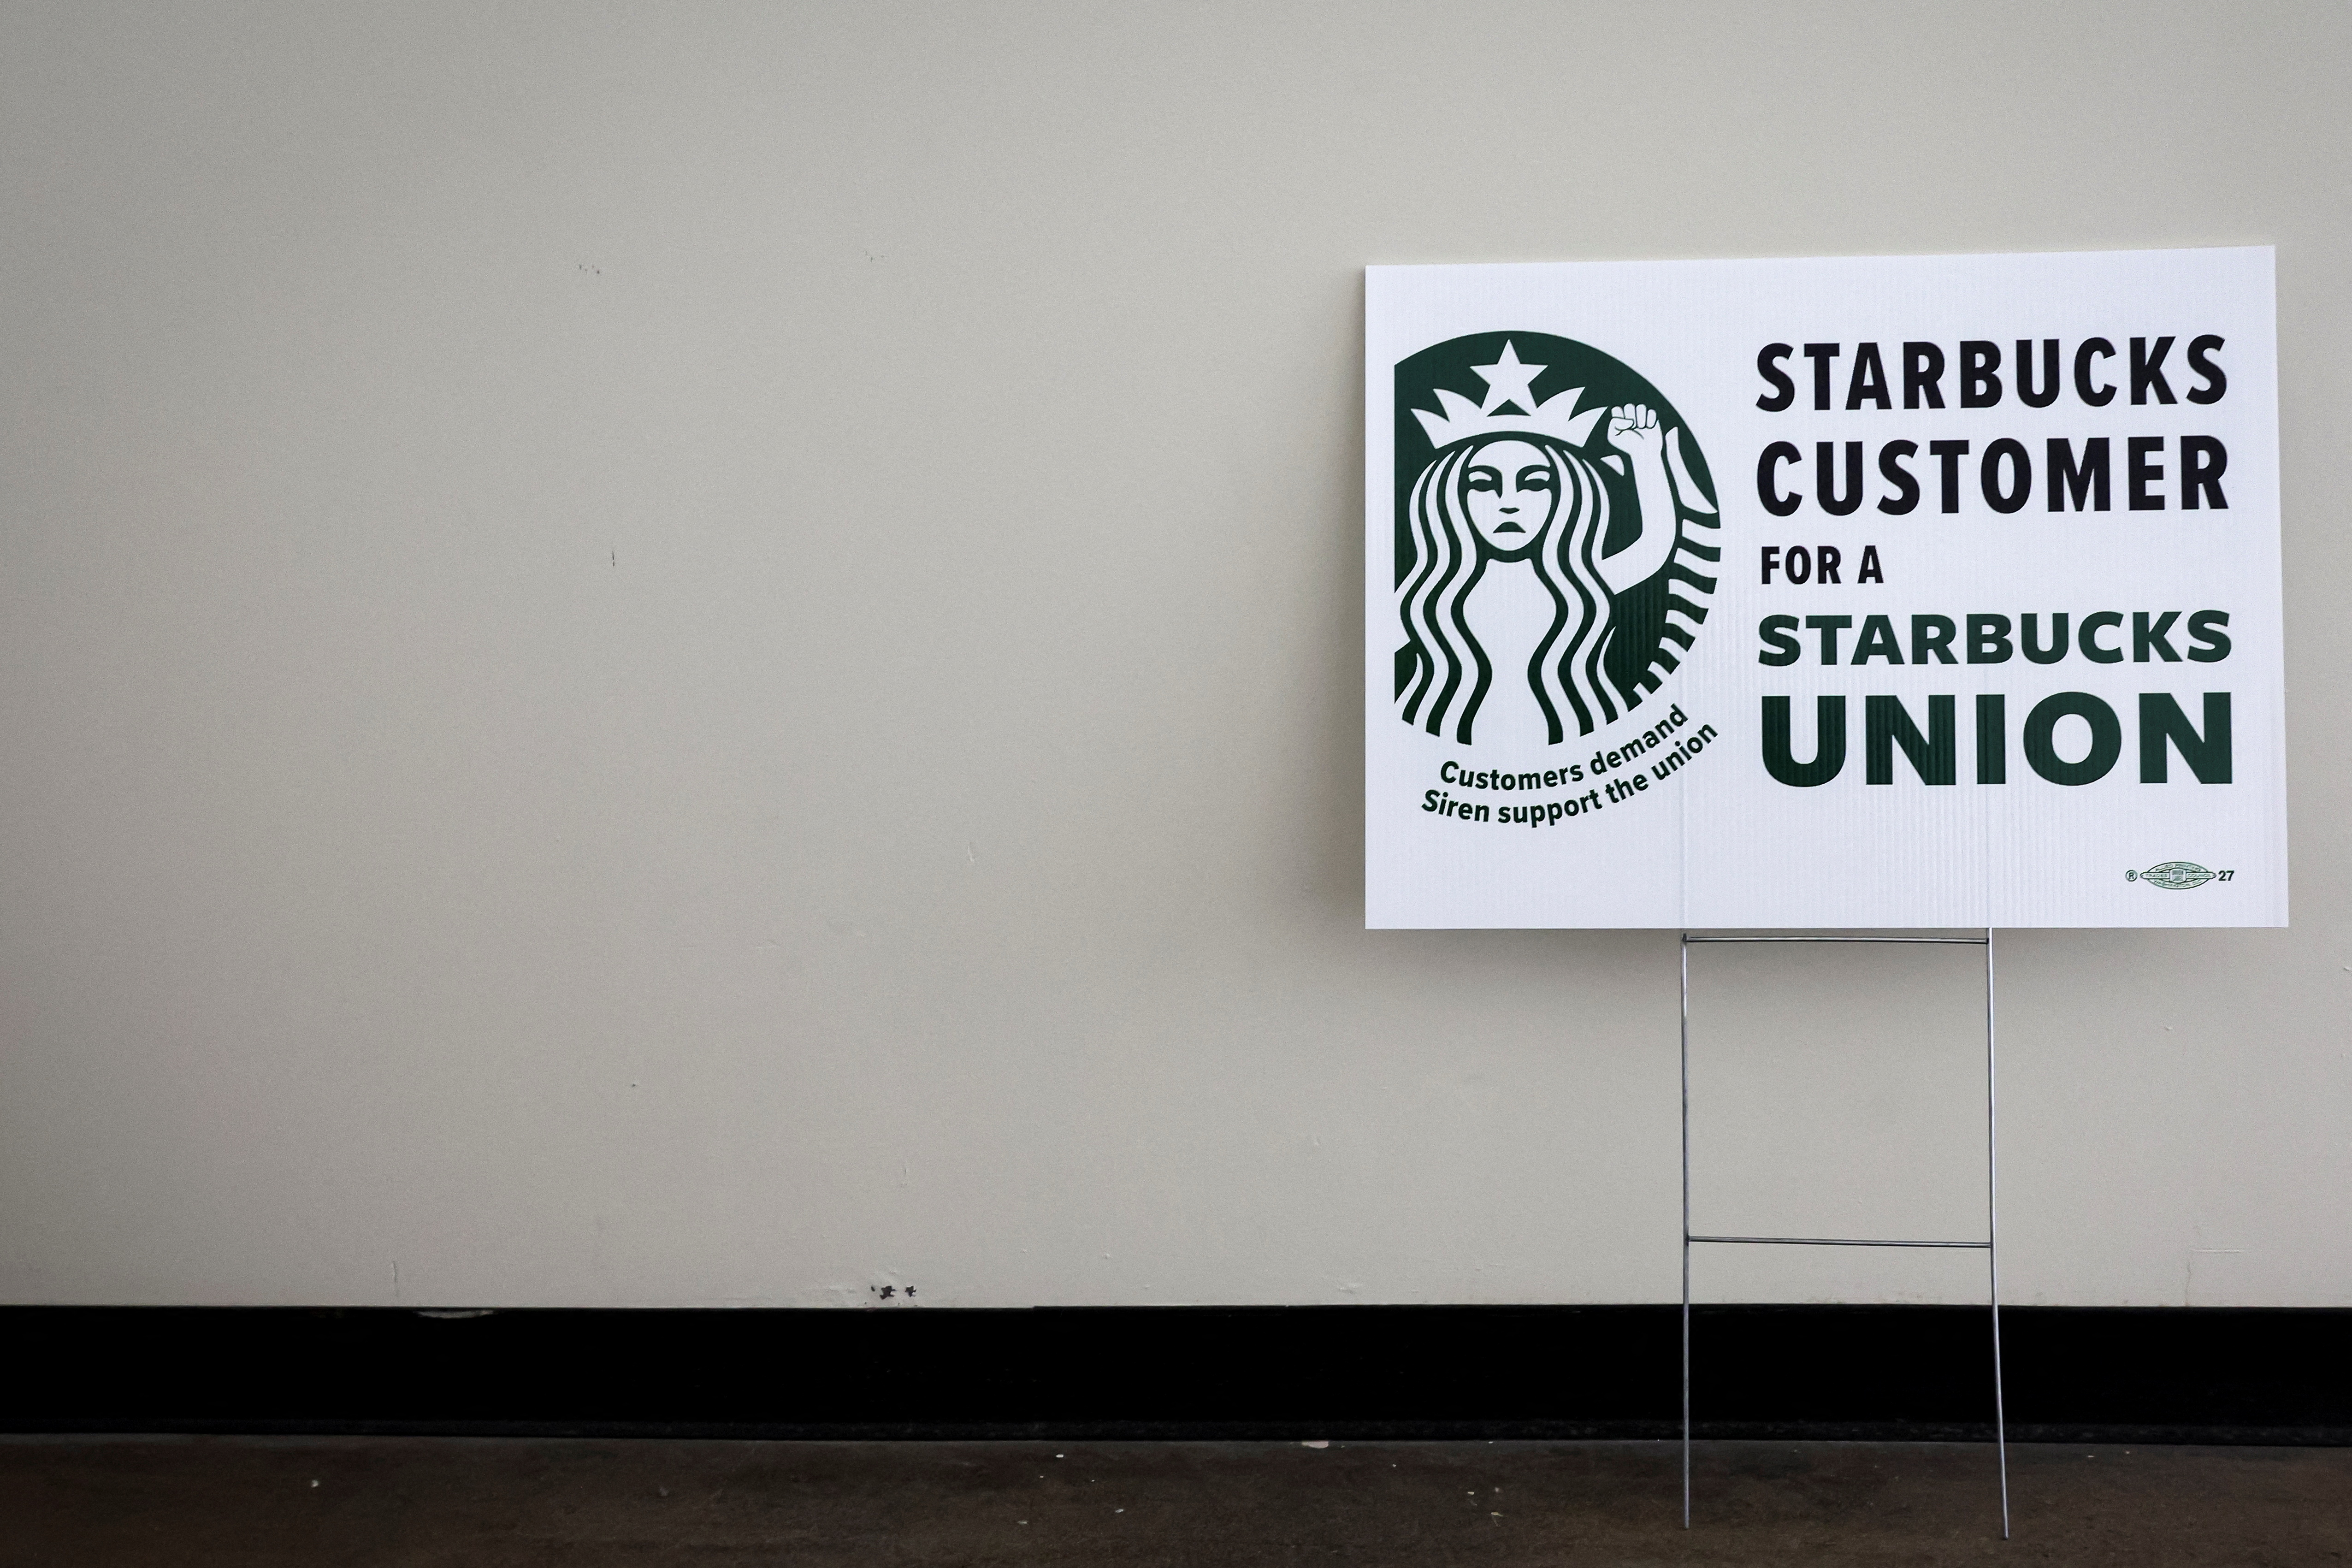 A sign showing support for a Starbucks Union is seen at the Workers United, an affiliate of the Service Employees International Union, offices in Buffalo, New York